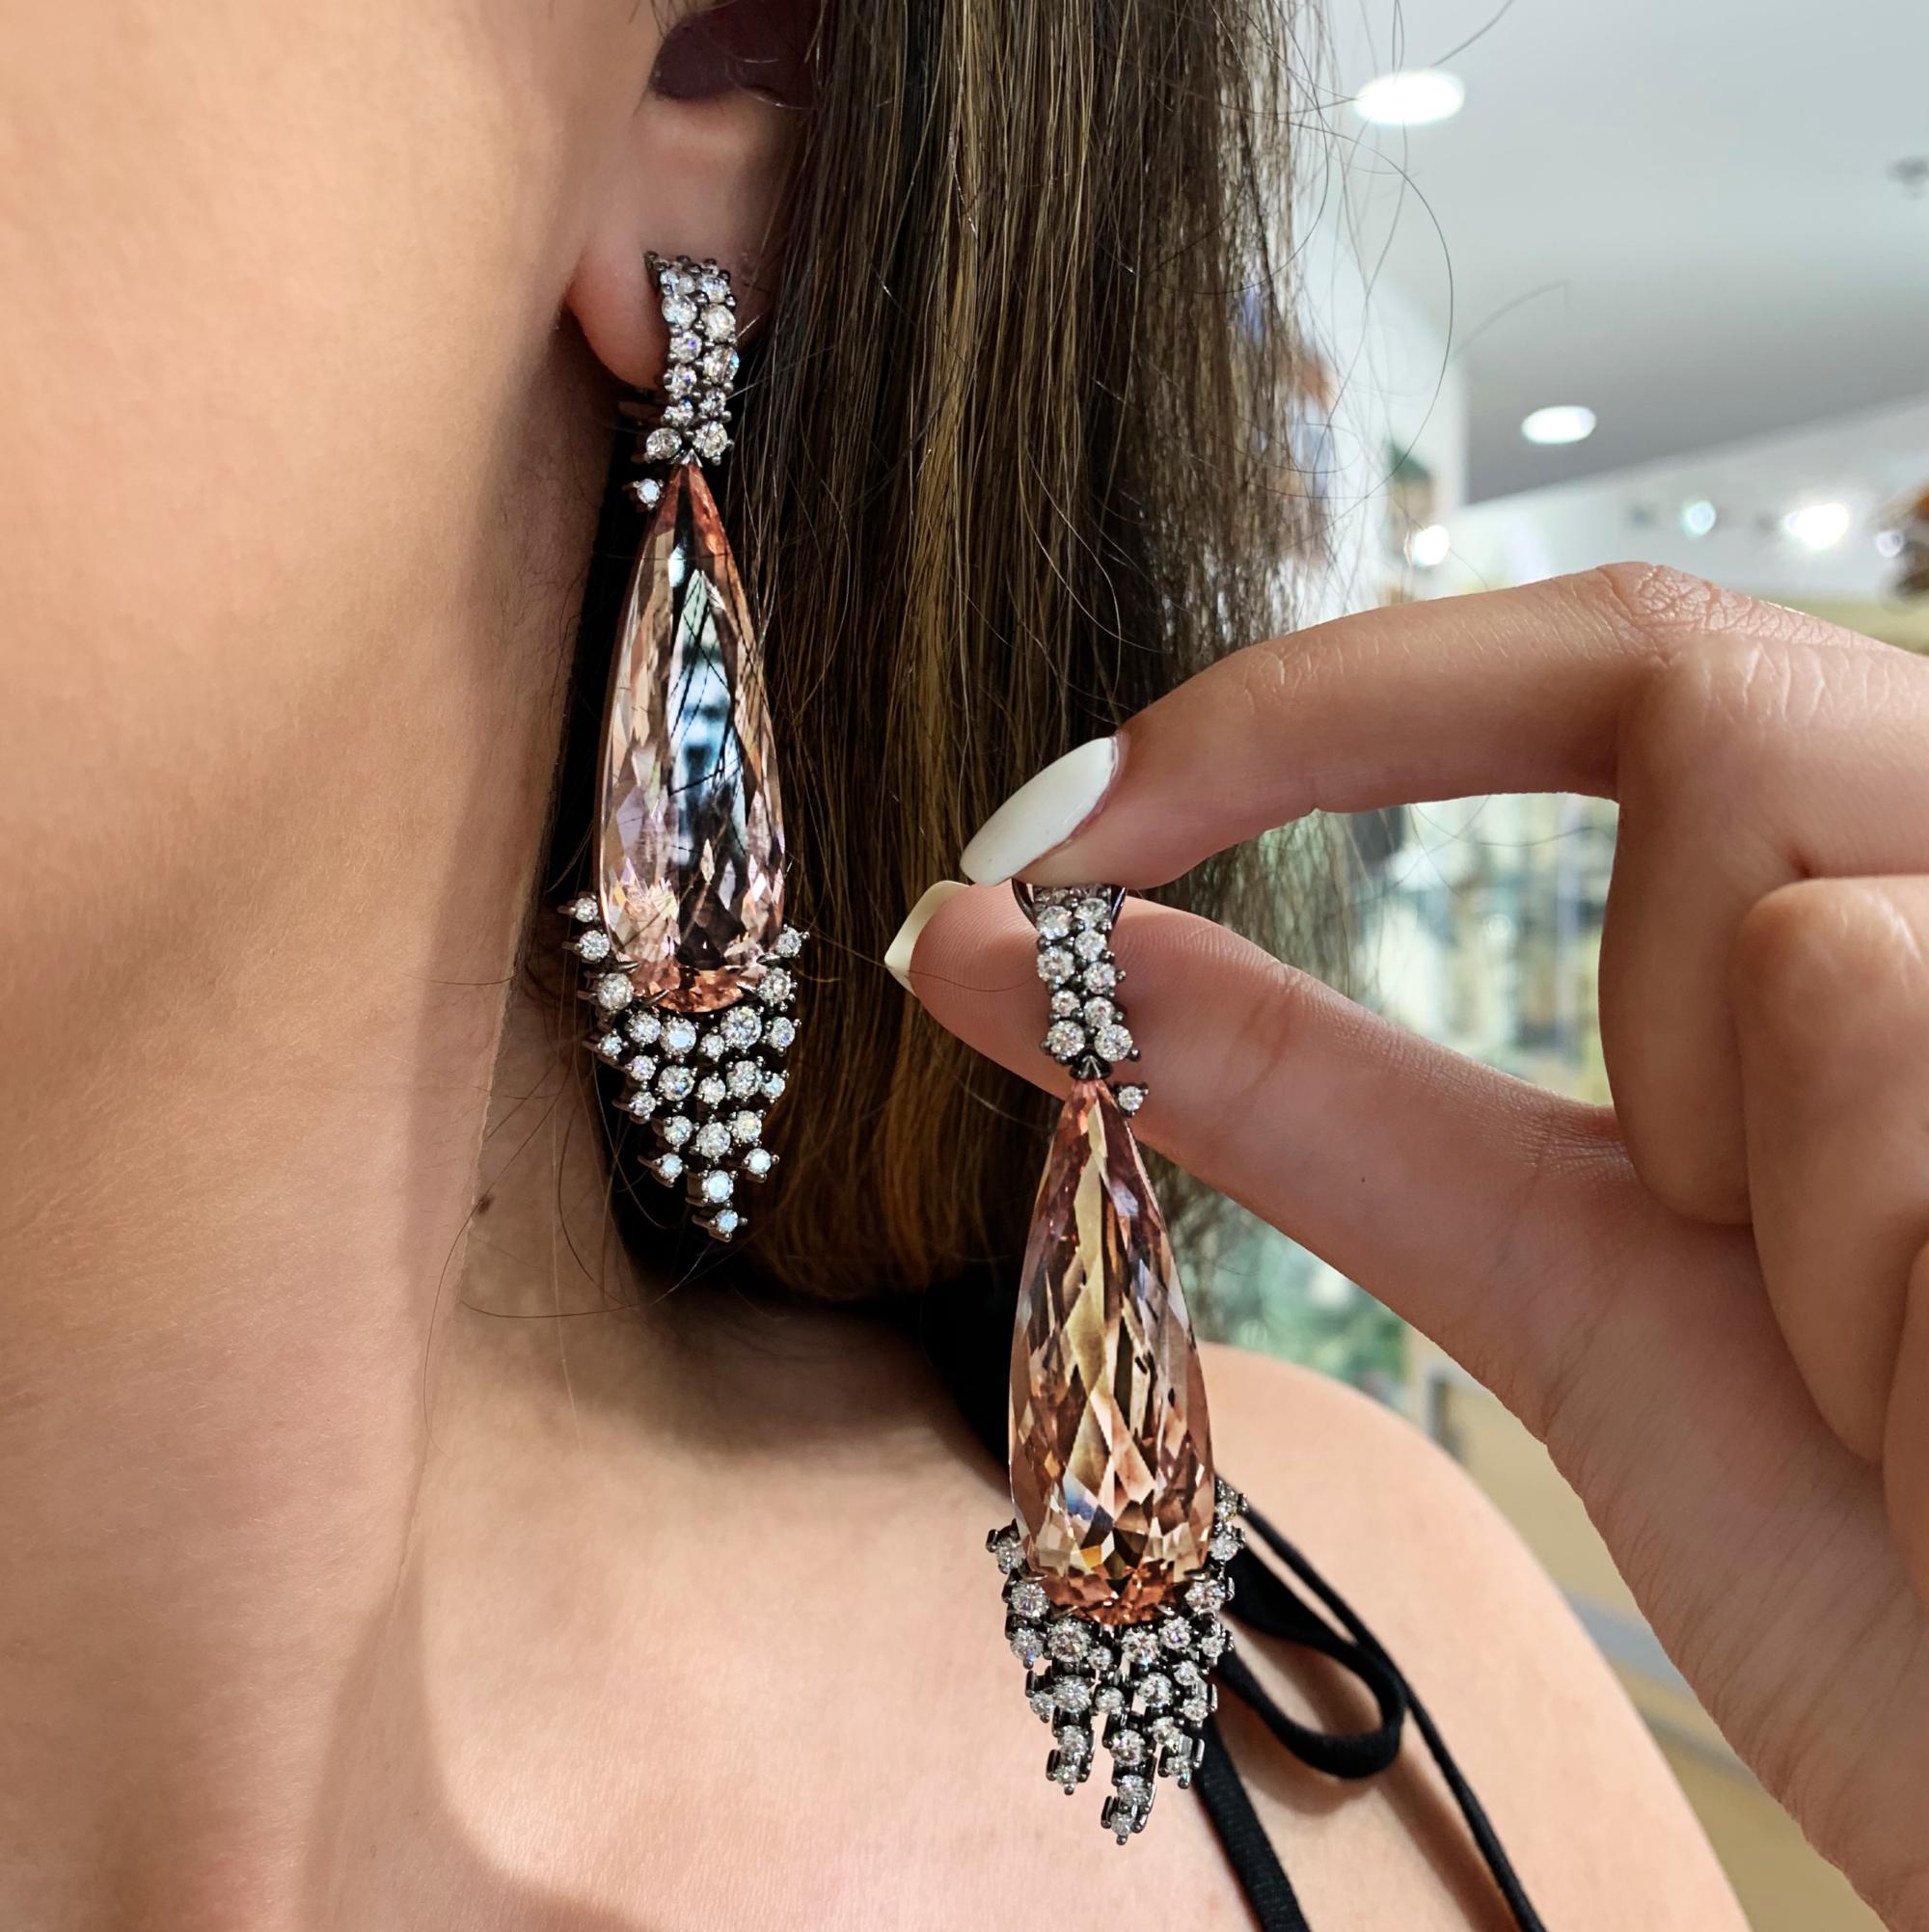 Specs: 18k white gold drop earrings with 65.77 total carats of morganites and 2.91 carats of white diamonds. 

Story: The Melting Ice collection by MadStone designer Kerri Halpern draws influence from its colorful gemstones creating playful